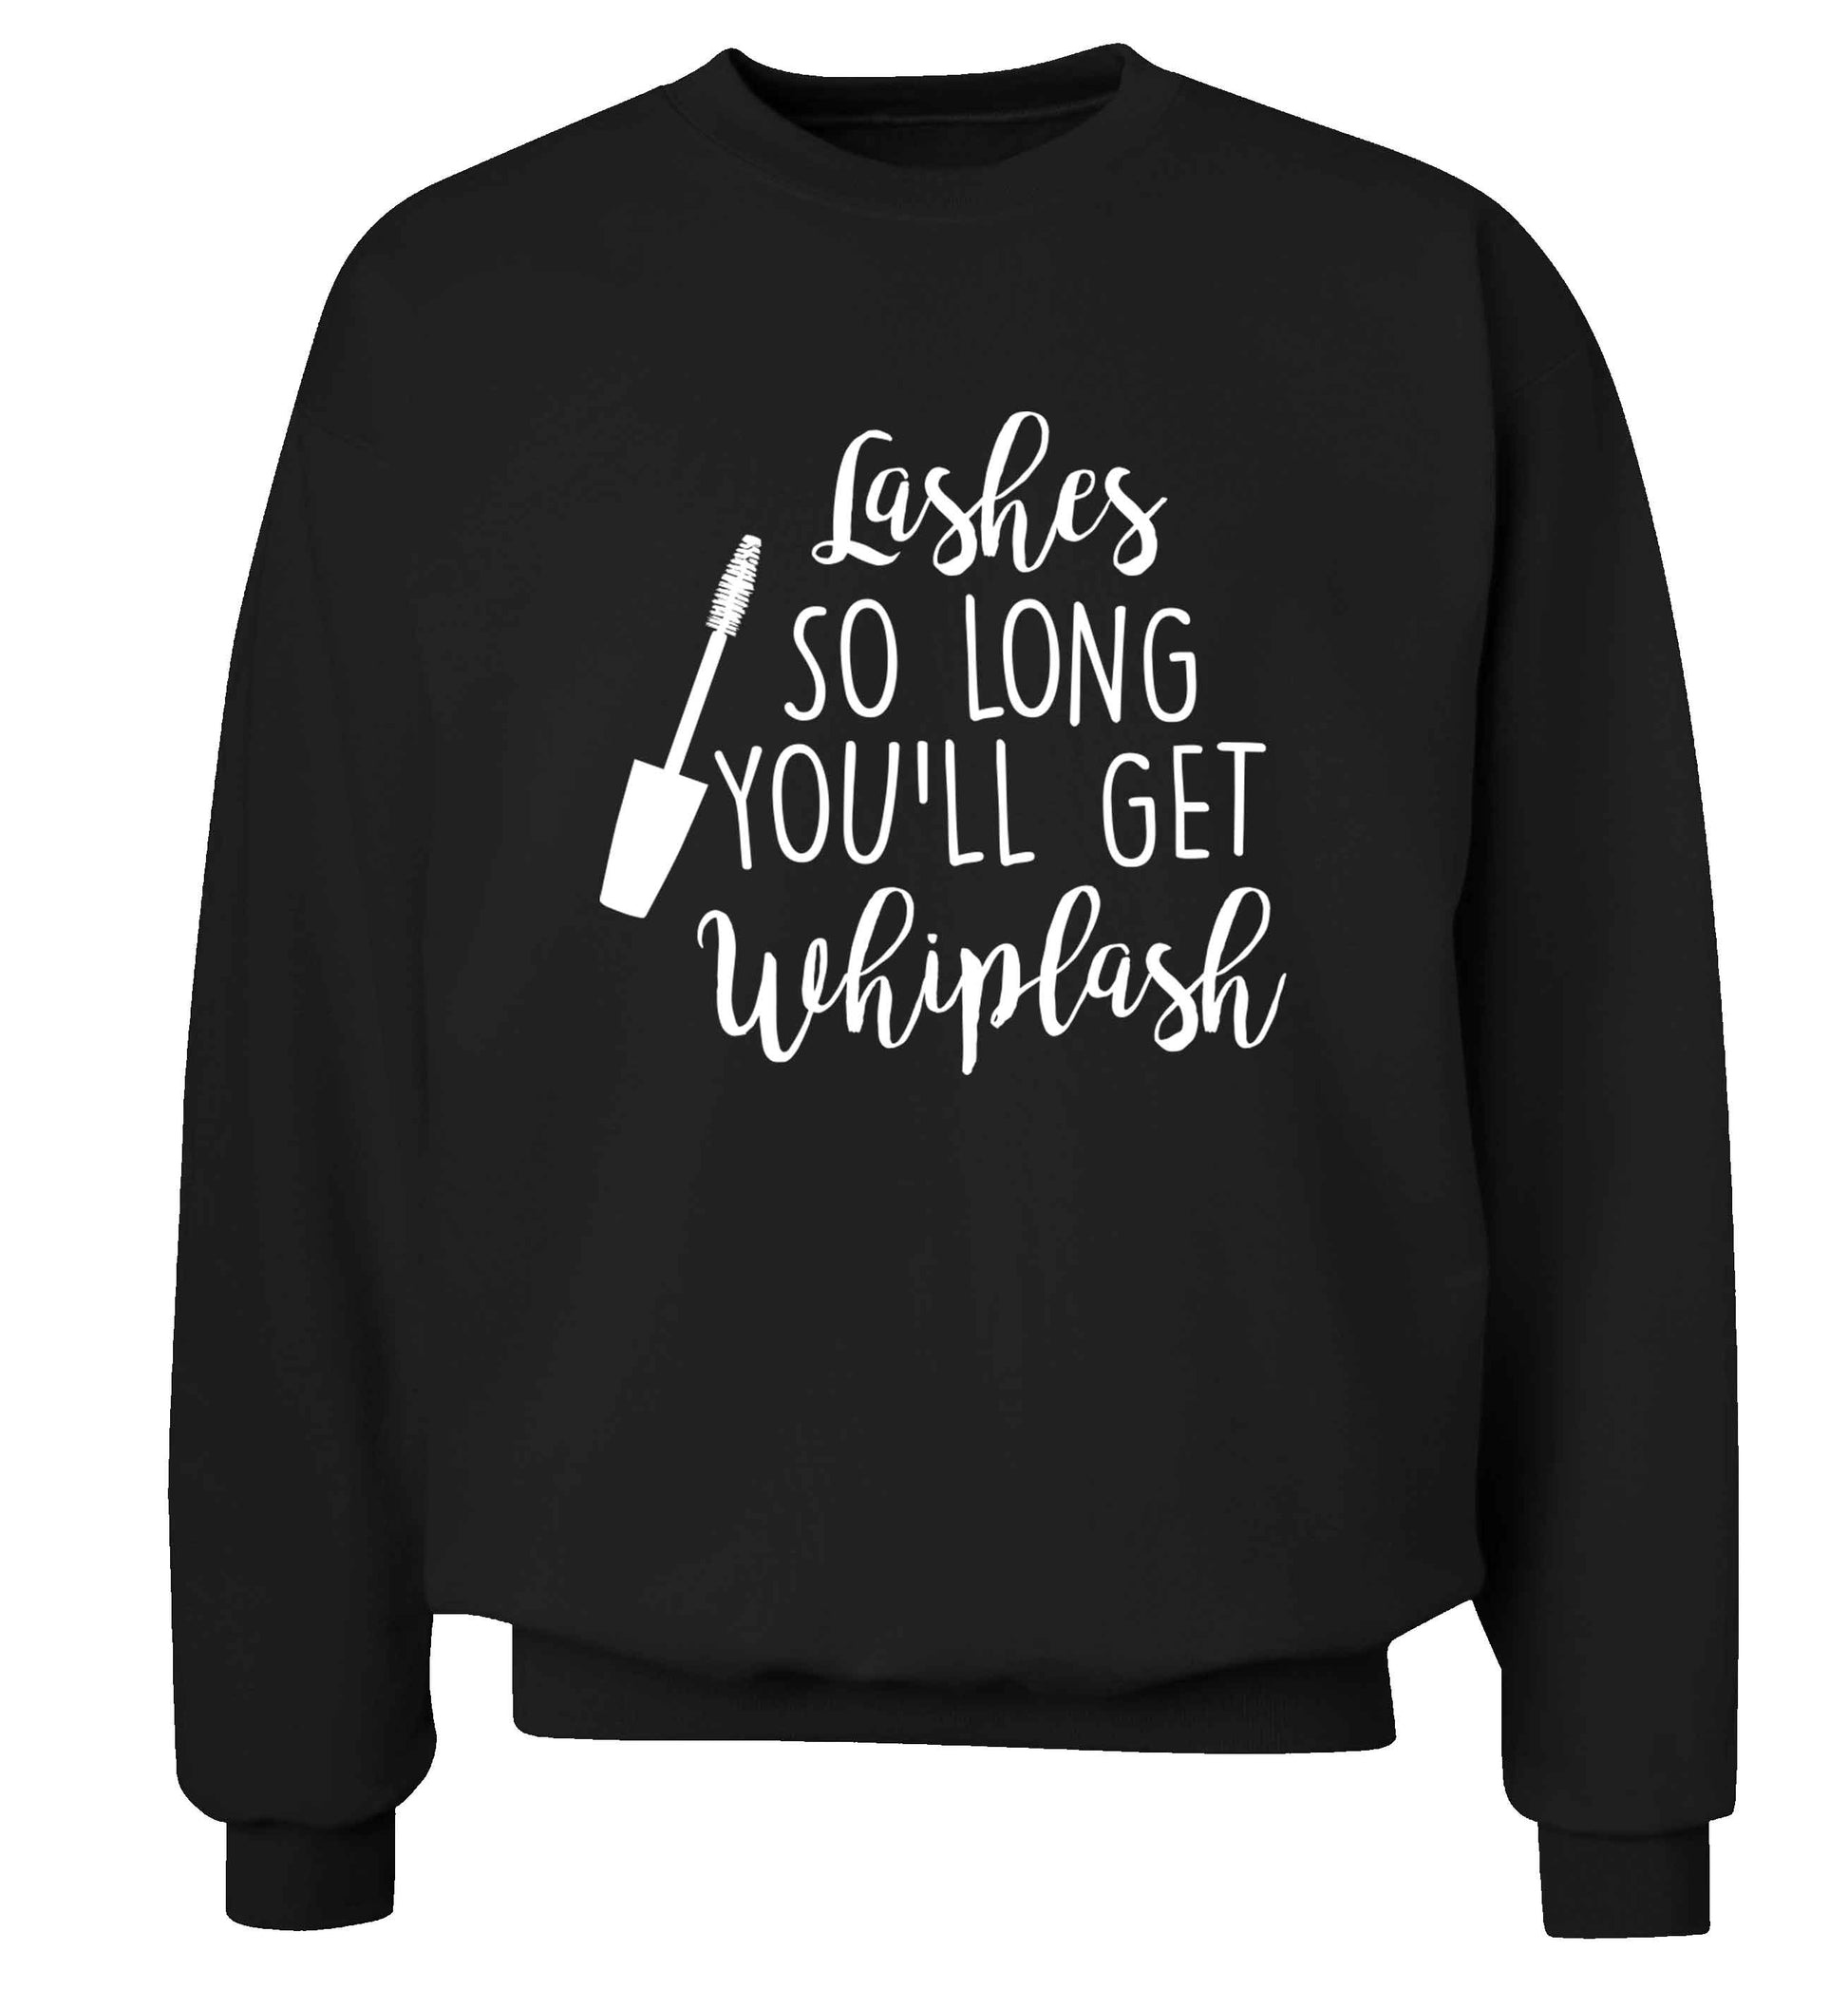 Lashes so long you'll get whiplash Adult's unisex black Sweater 2XL